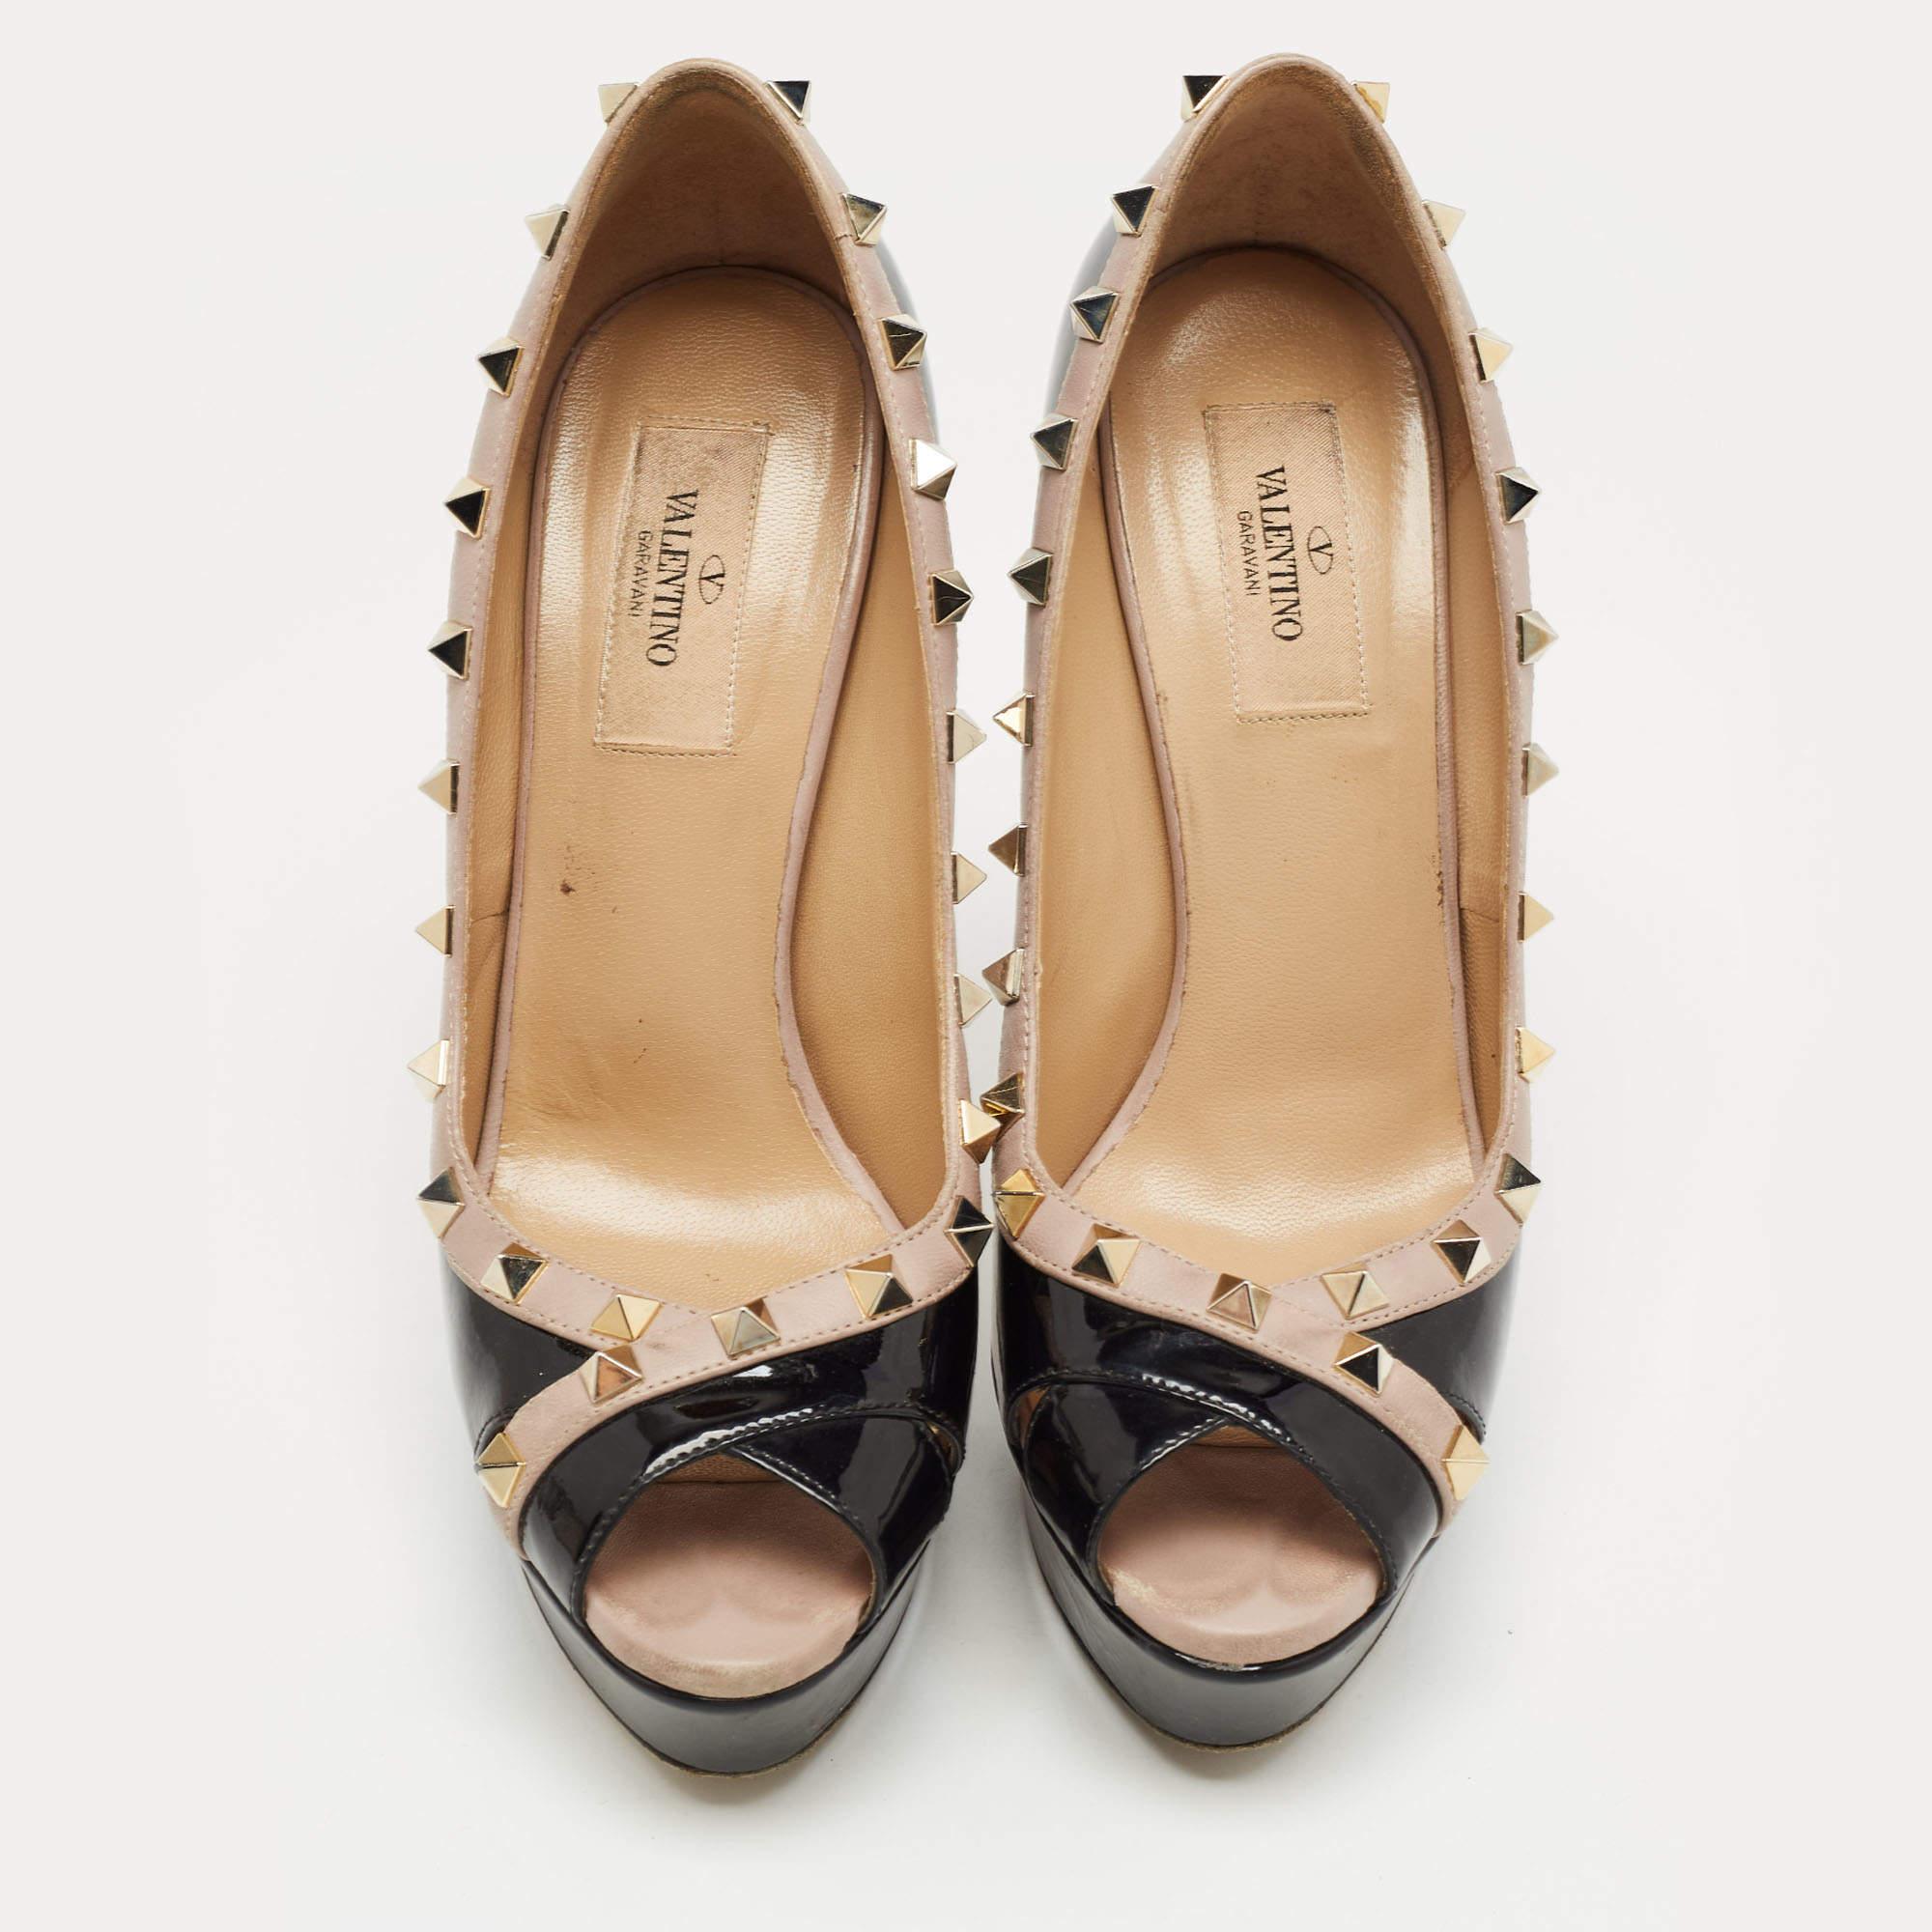 The elegantly placed Rockstuds on the outline of this pair of Valentino pumps makes it captivating. Crafted from patent leather, it is perfectly raised on 12cm heels and platforms.

Includes: Original Dustbag